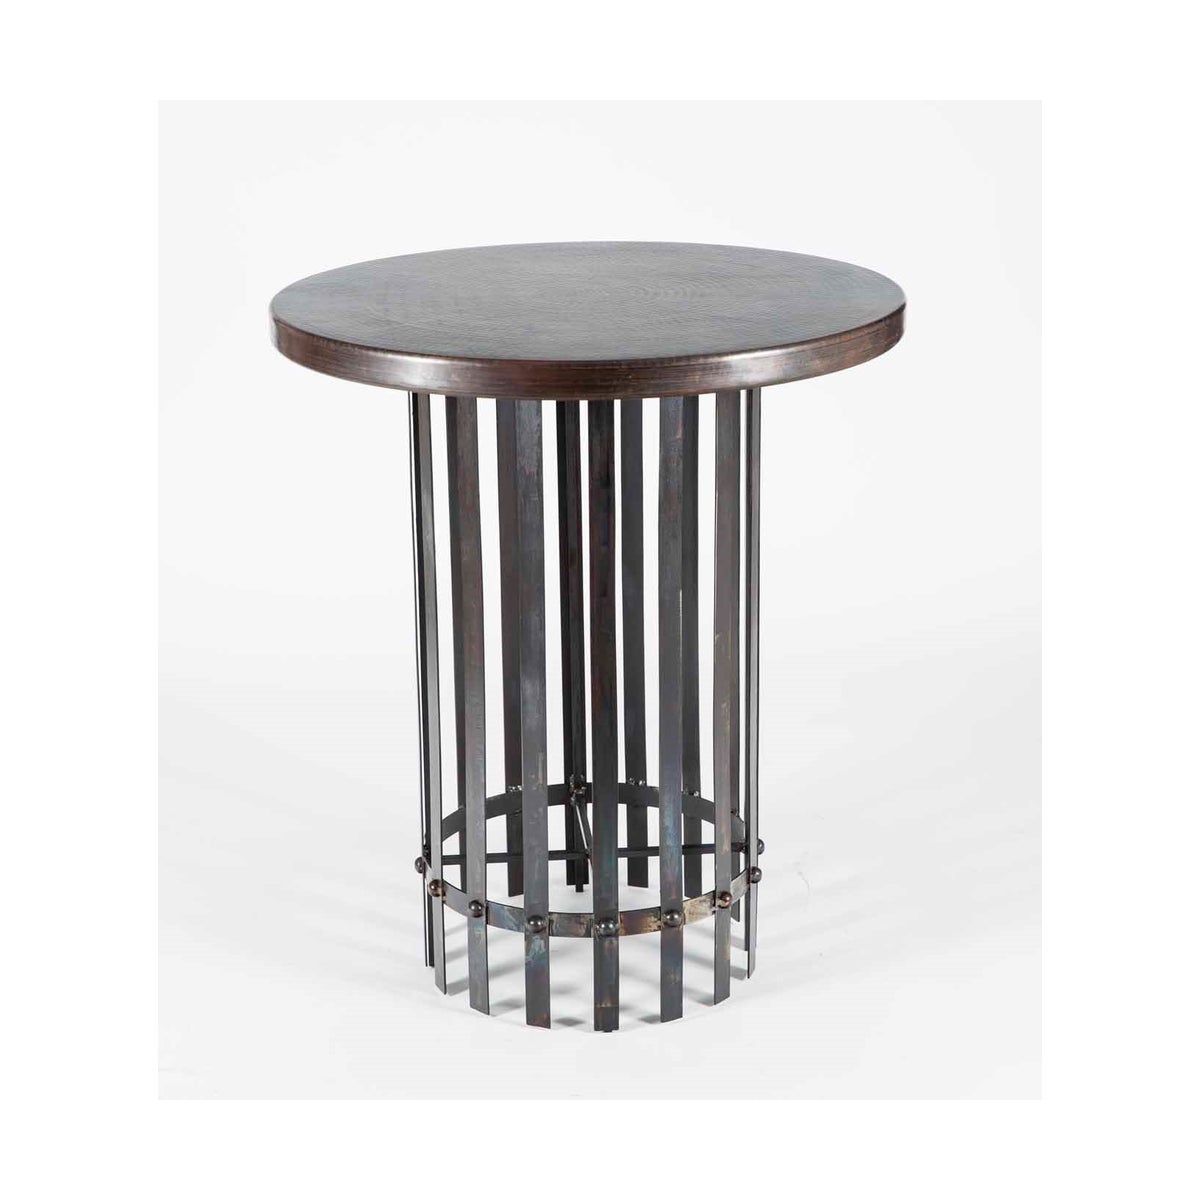 Ashton Bar Table with 42" Round Dark Brown Hammered Copper Top